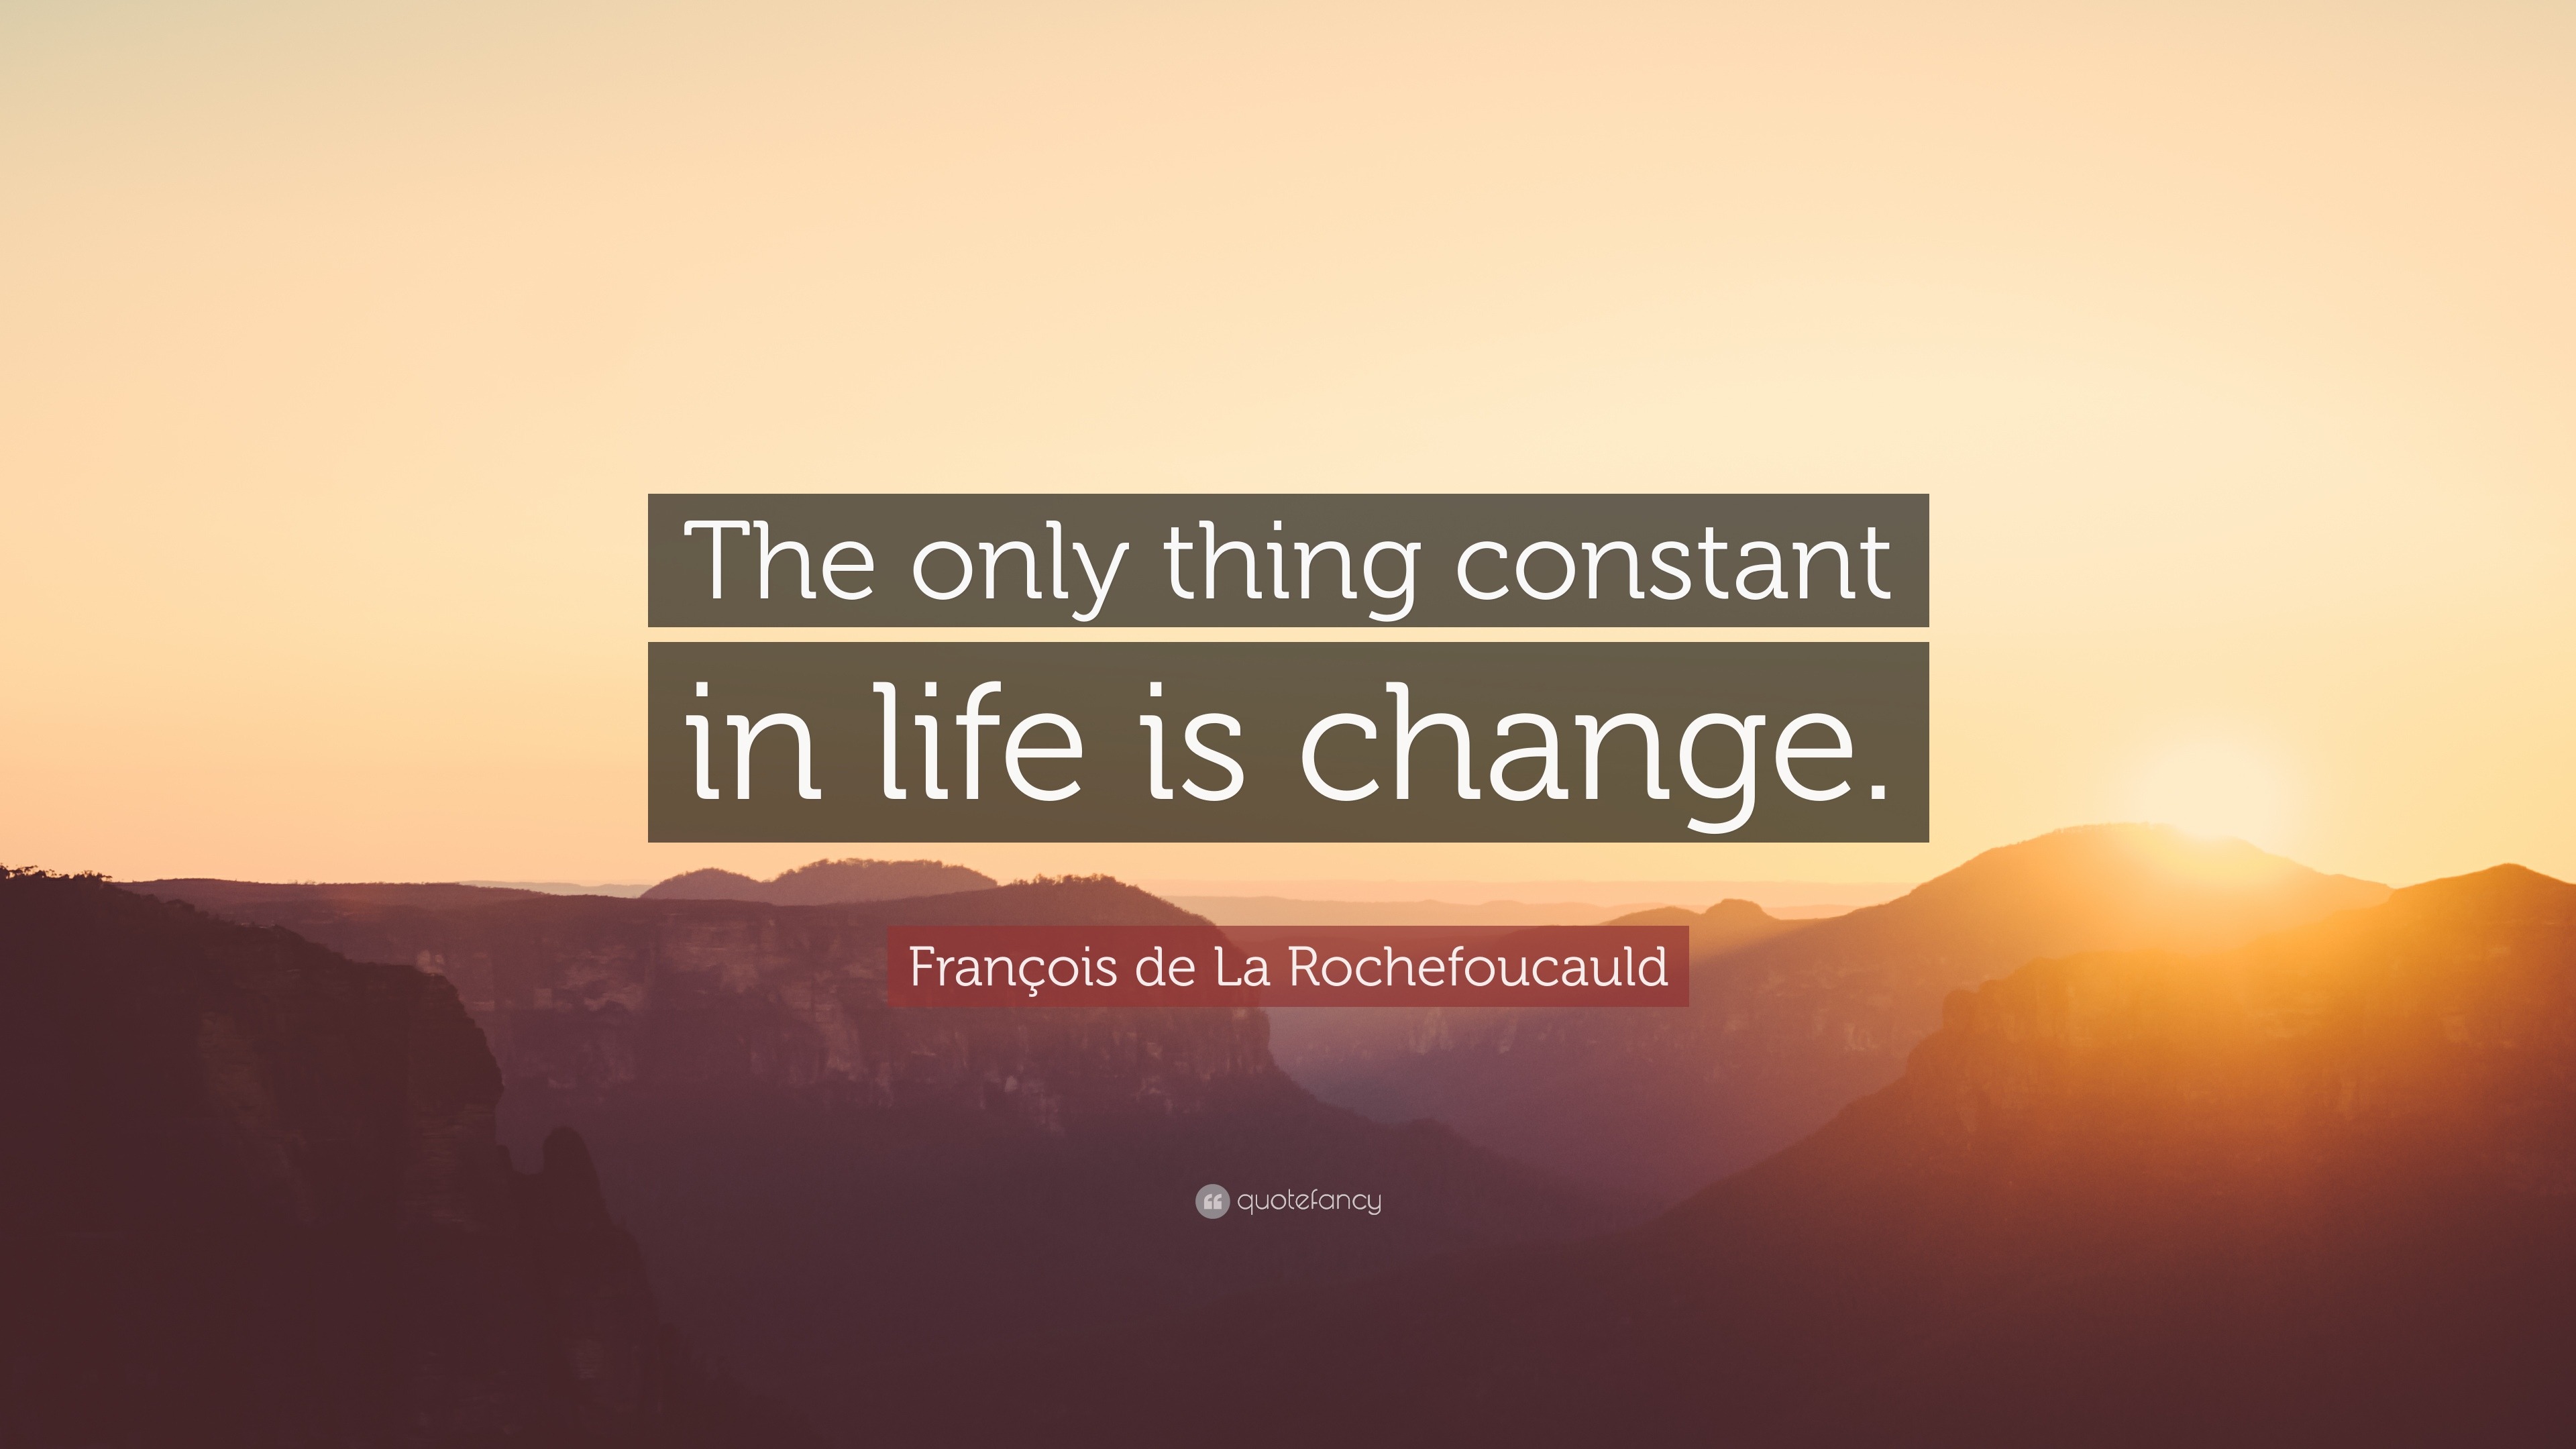 Fran§ois de La Rochefoucauld Quote “The only thing constant in life is change